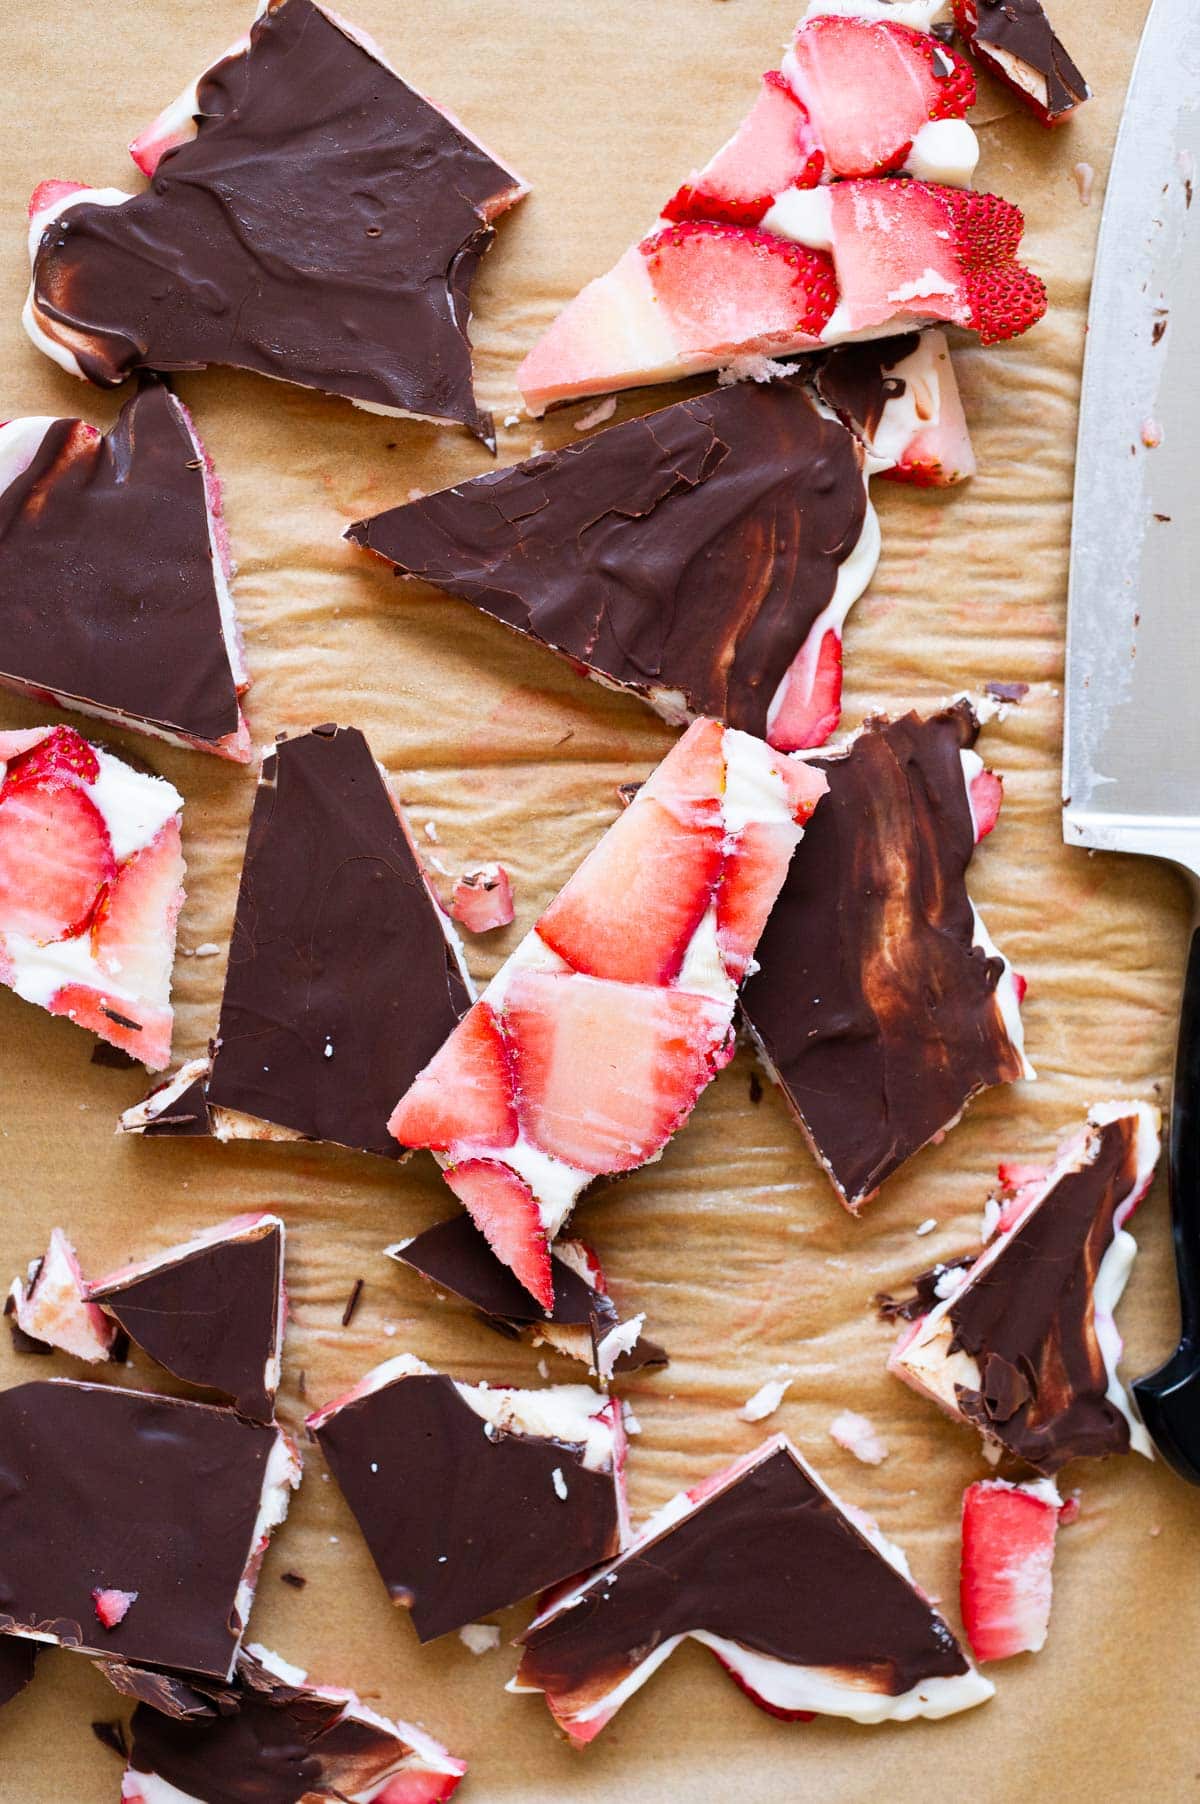 Strawberry bark cut into slices on parchment paper. Knife nearby.